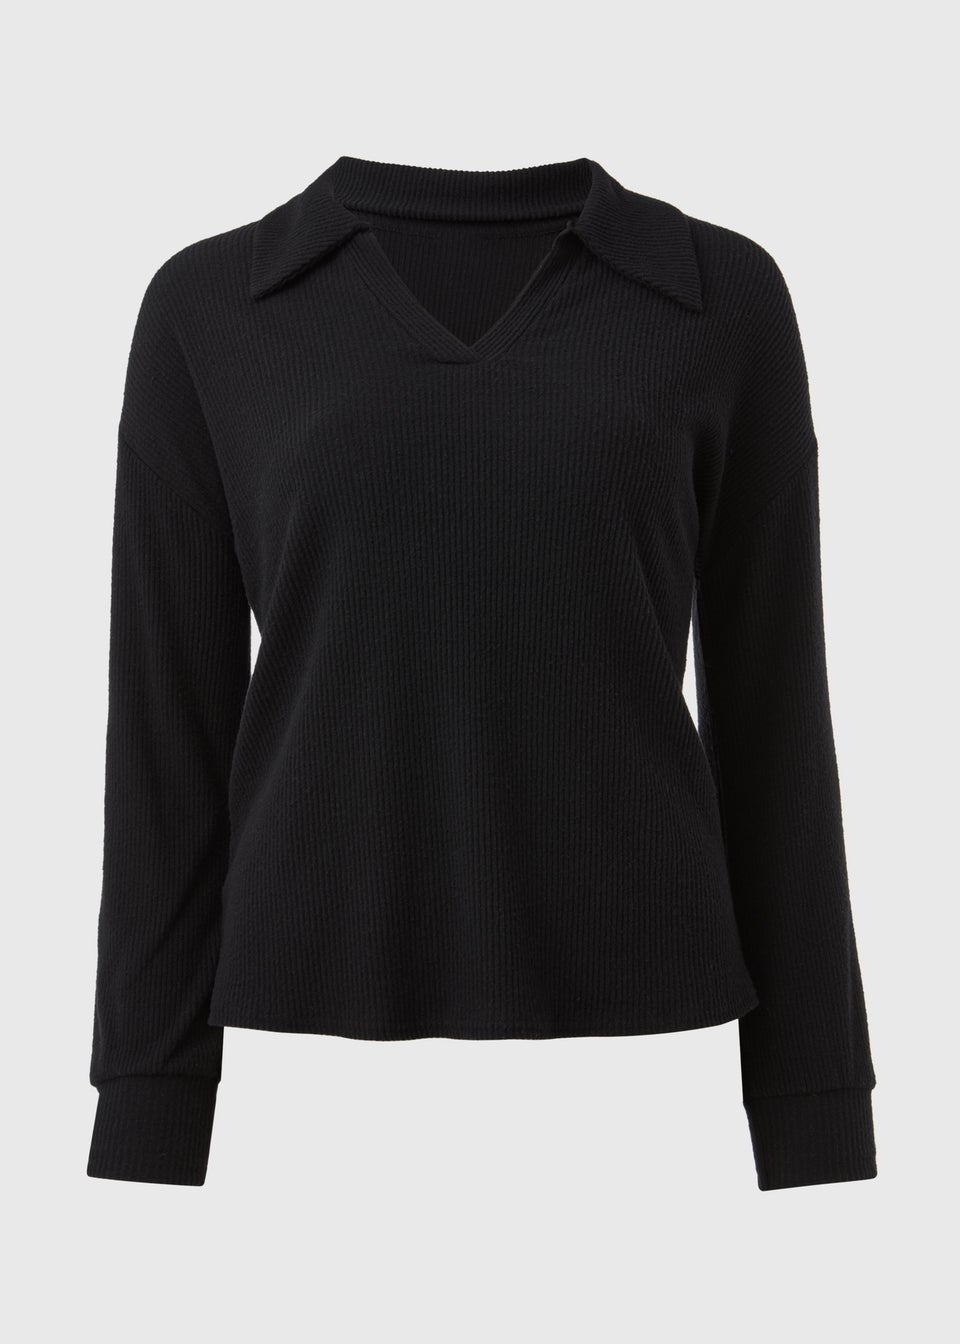 Black Collared Pullover Top